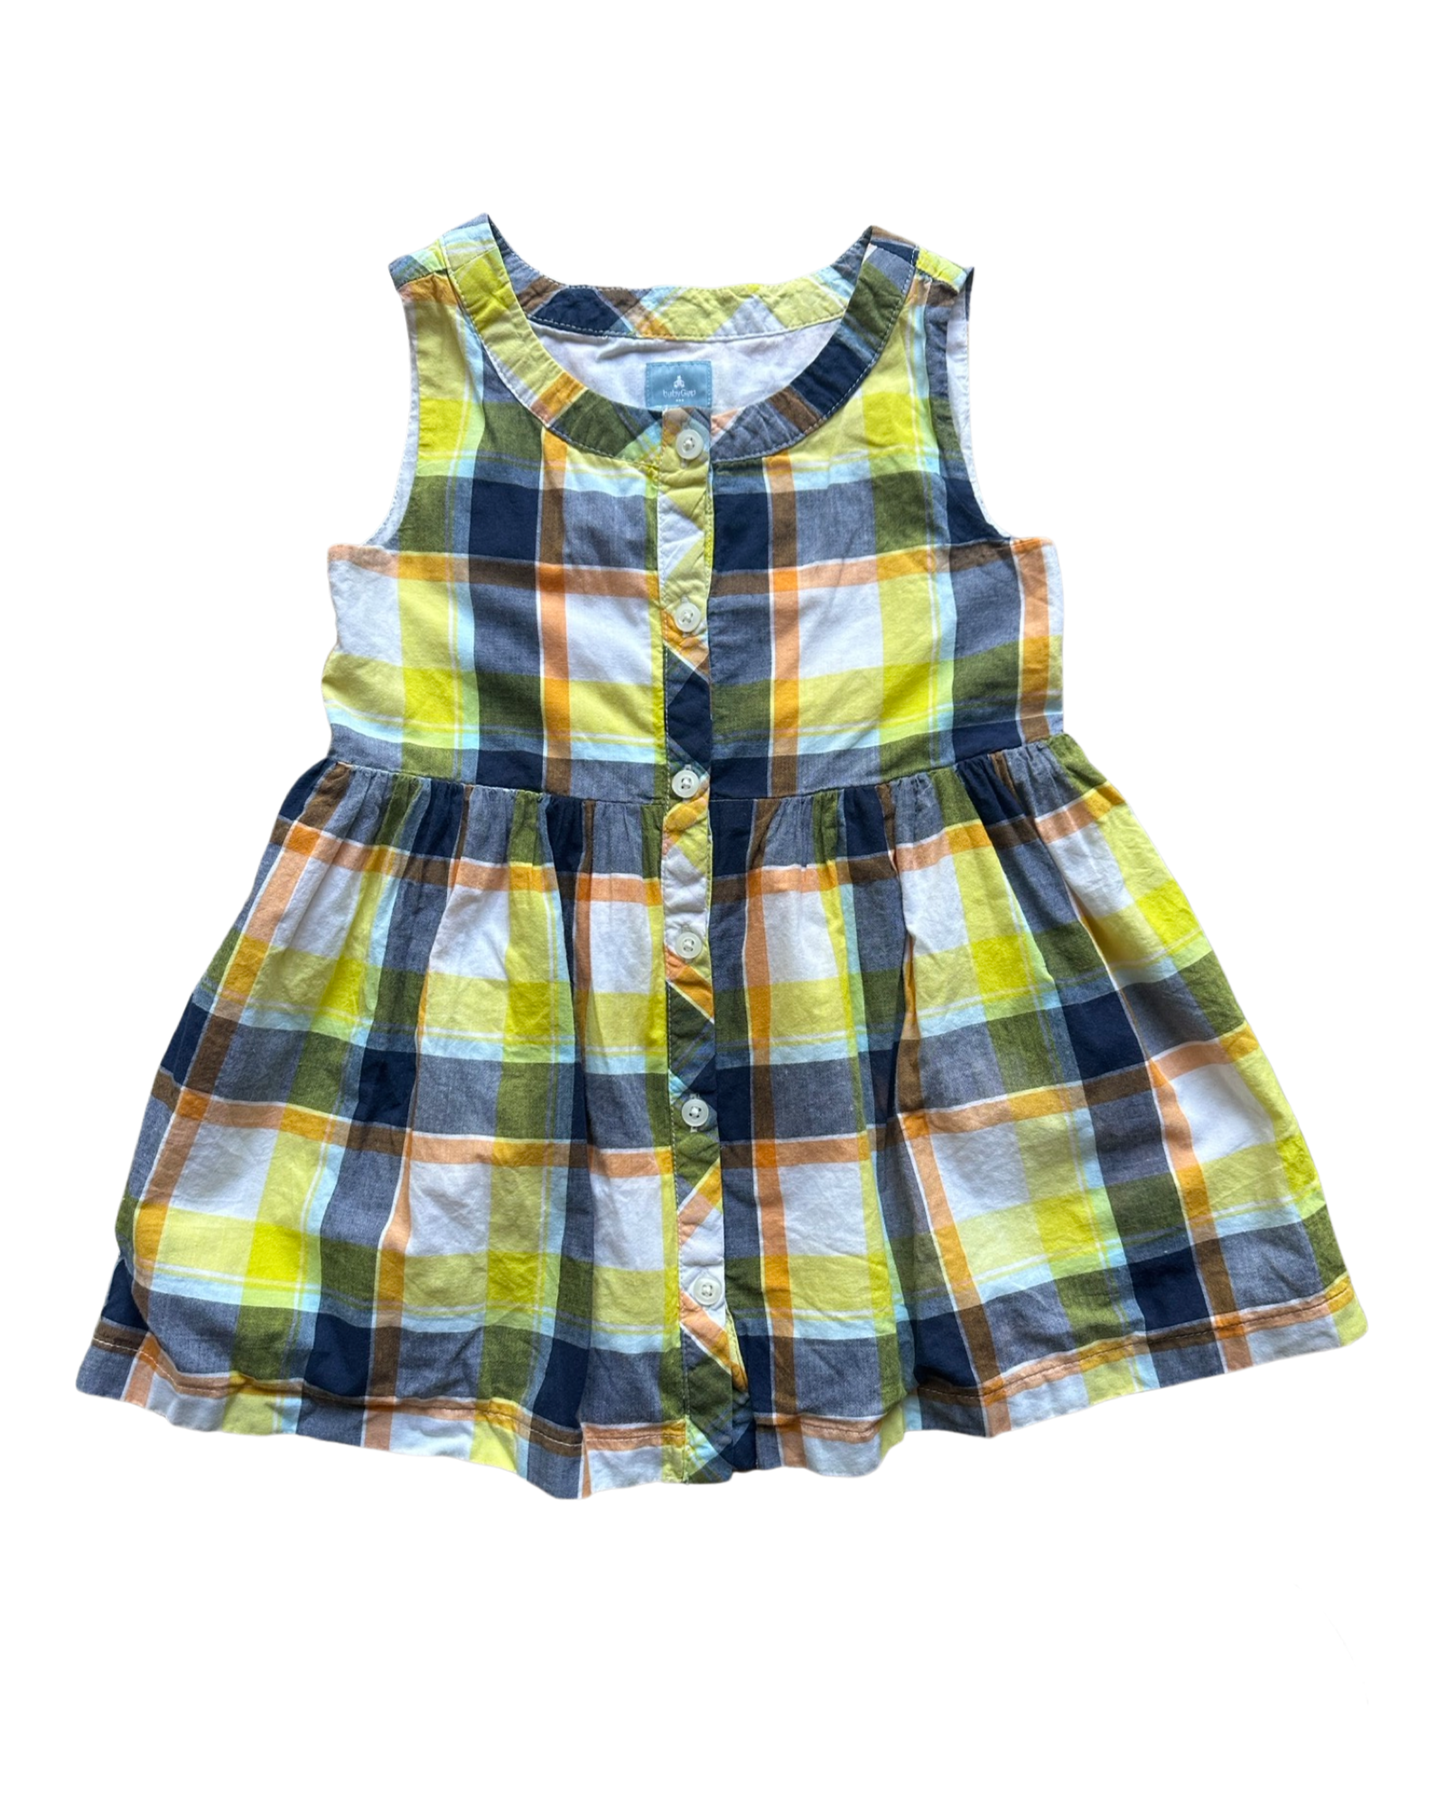 Baby Gap checked cotton dress (size 18-24mths)